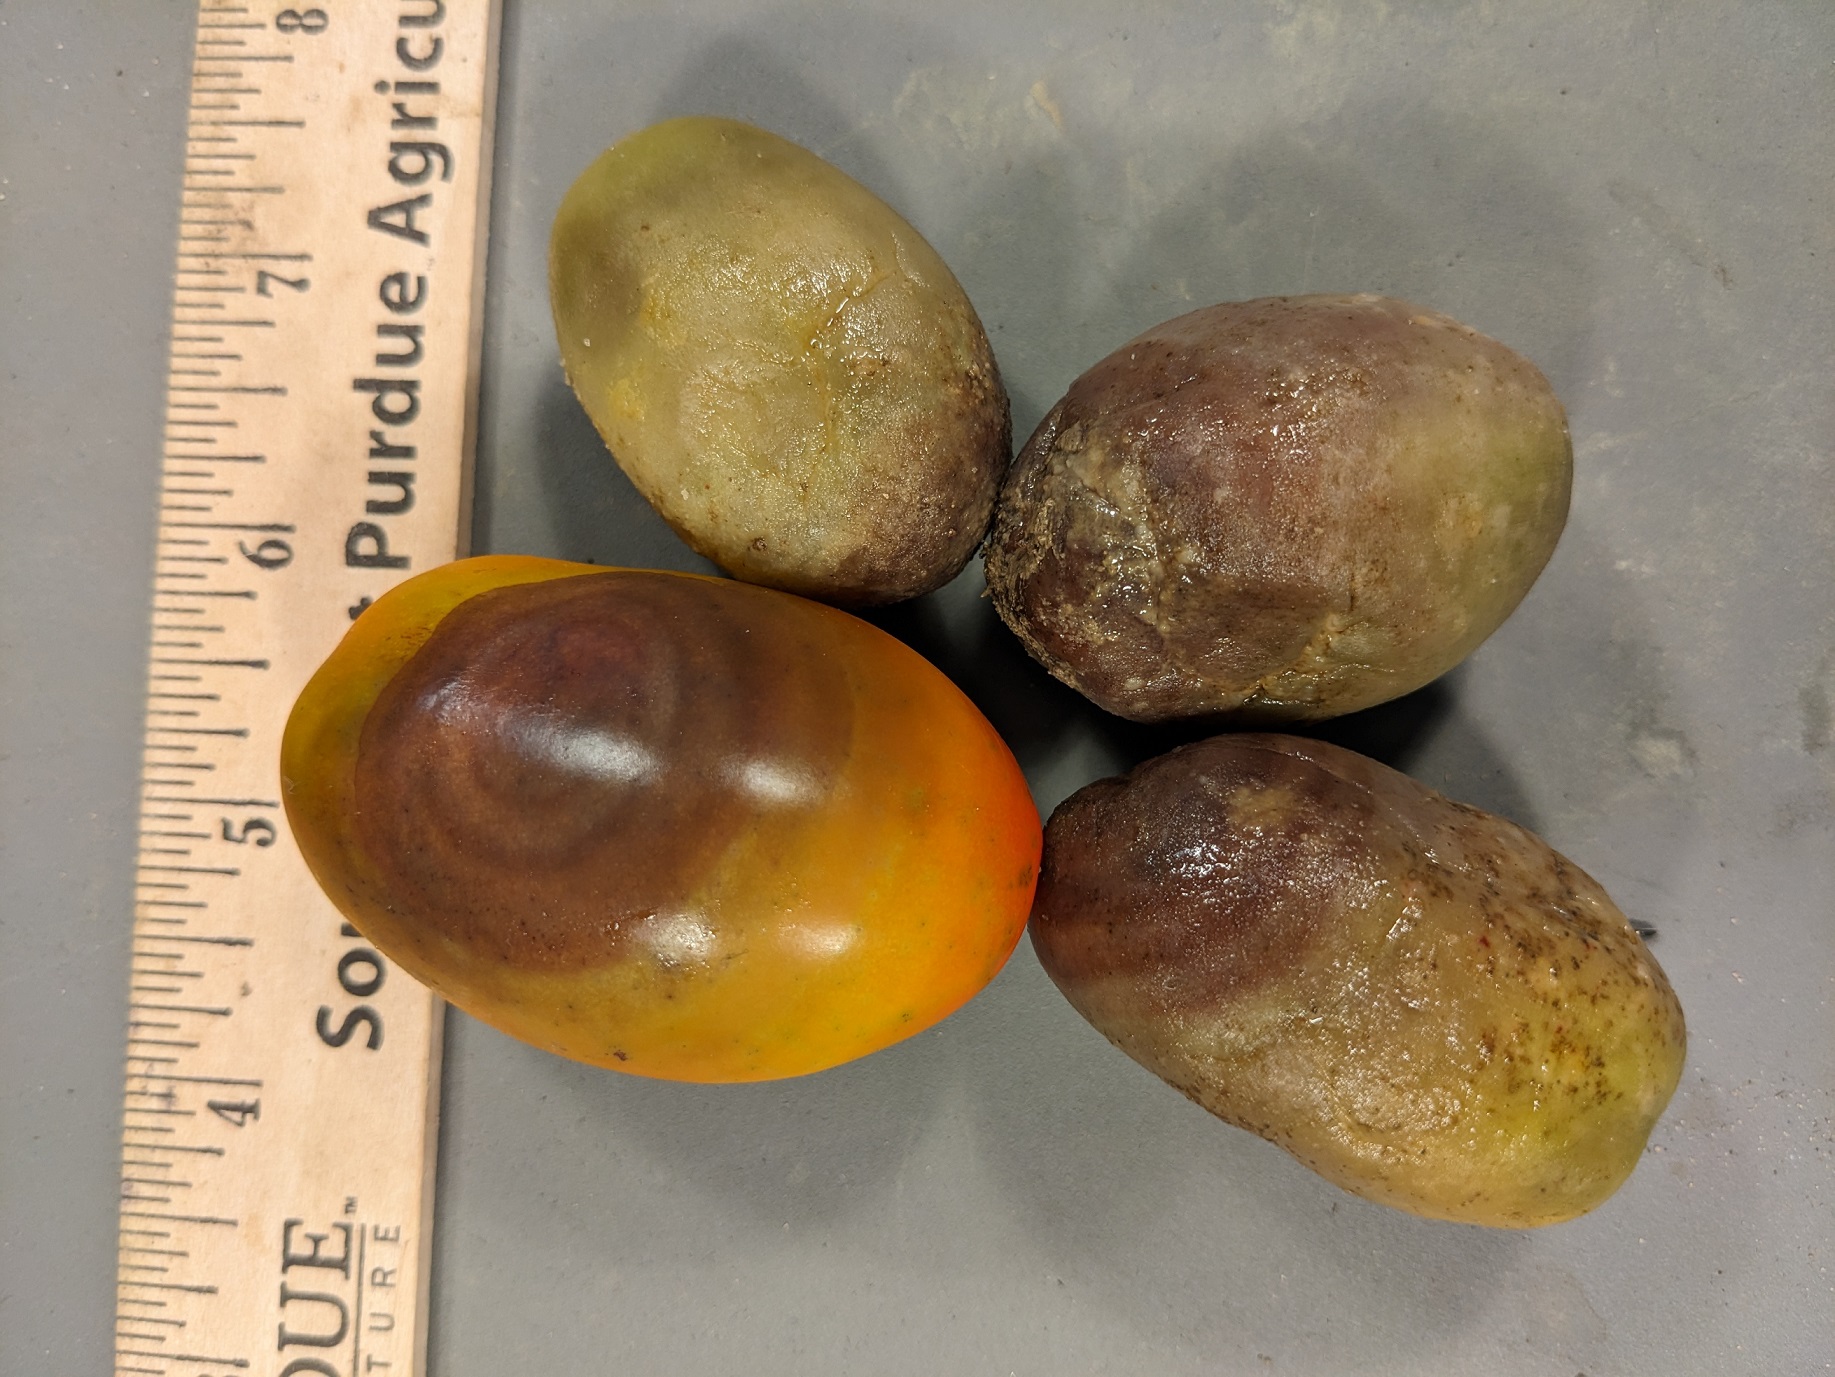 Four tomatoes with Buckeye rot with a range of symptoms. Concentric circles of necrosis is typical of Buckeye rot. 